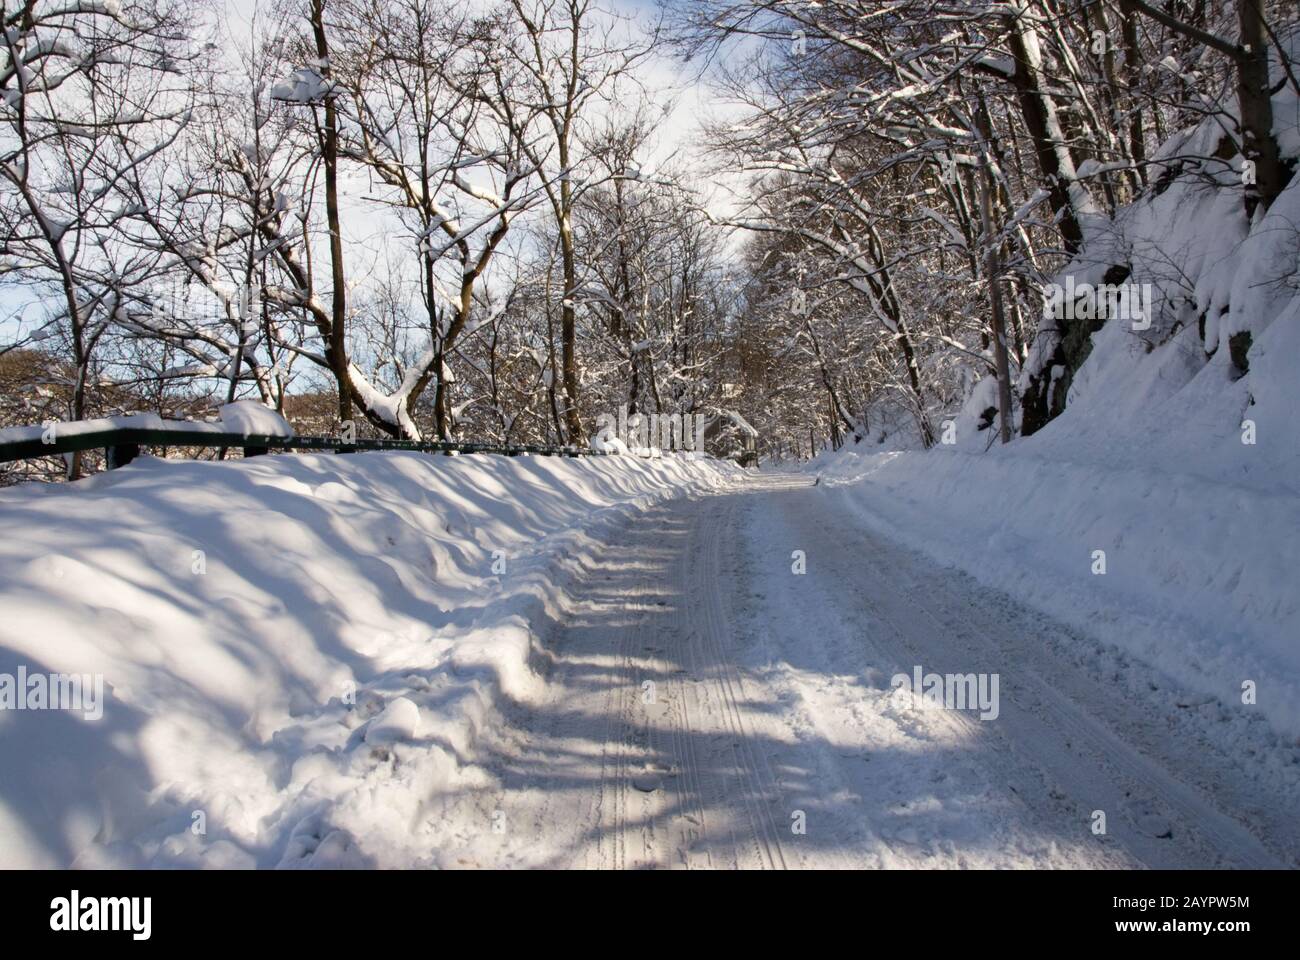 Snow covered roads in Ellicott City Maryland USA after a blizzard came through the area. The roads remained impassable even after some clearing. Stock Photo